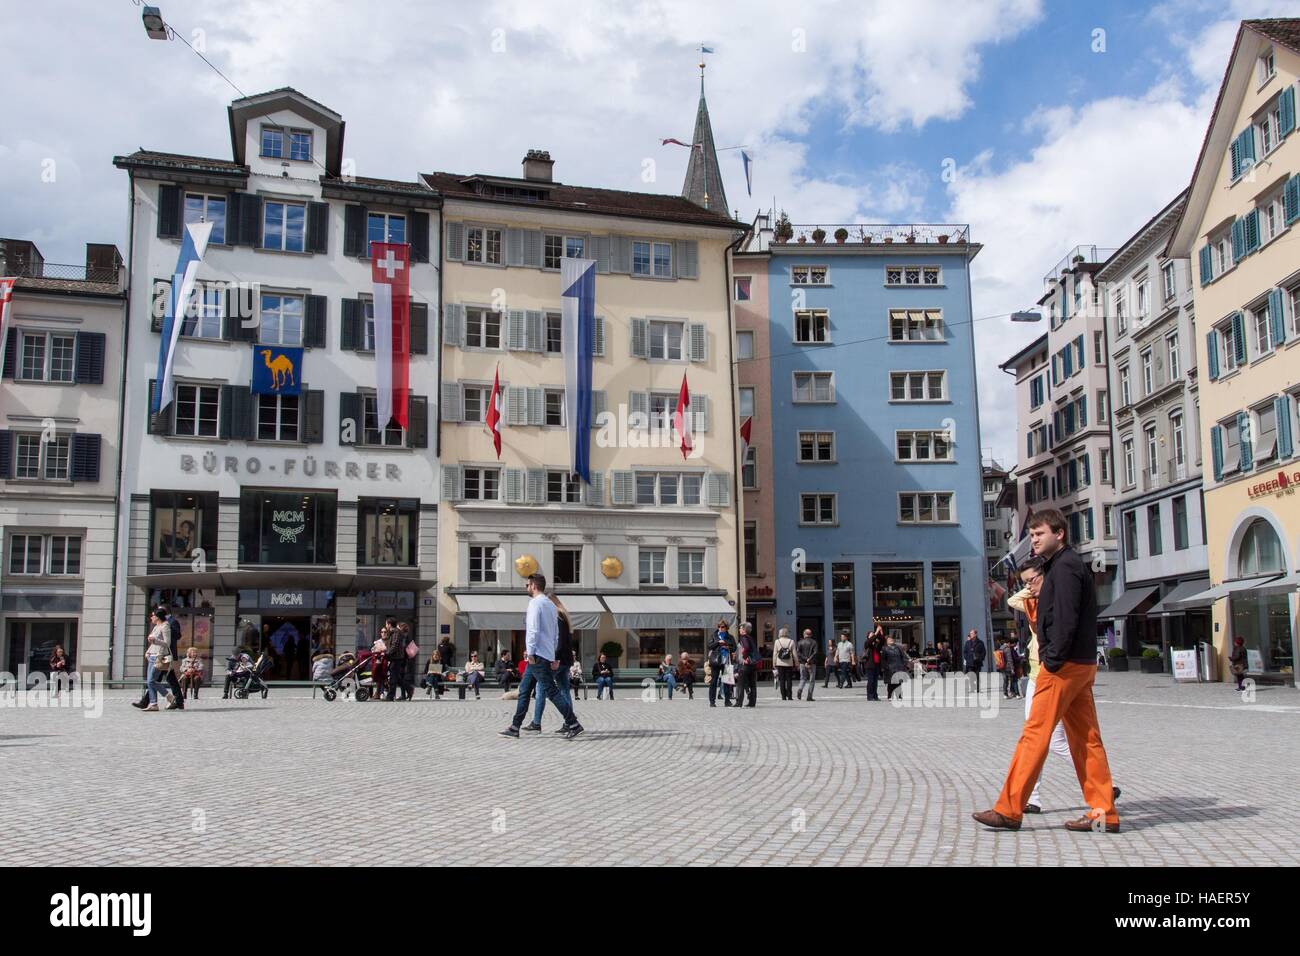 COUPLE STROLLING ON MUNSTERHOF SQUARE AT THE FOOT OF THE FRAUMUNSTER CHURCH IN THE HISTORIC CITY CENTER OF ZURICH, CANTON OF ZURICH, SWITZERLAND Stock Photo